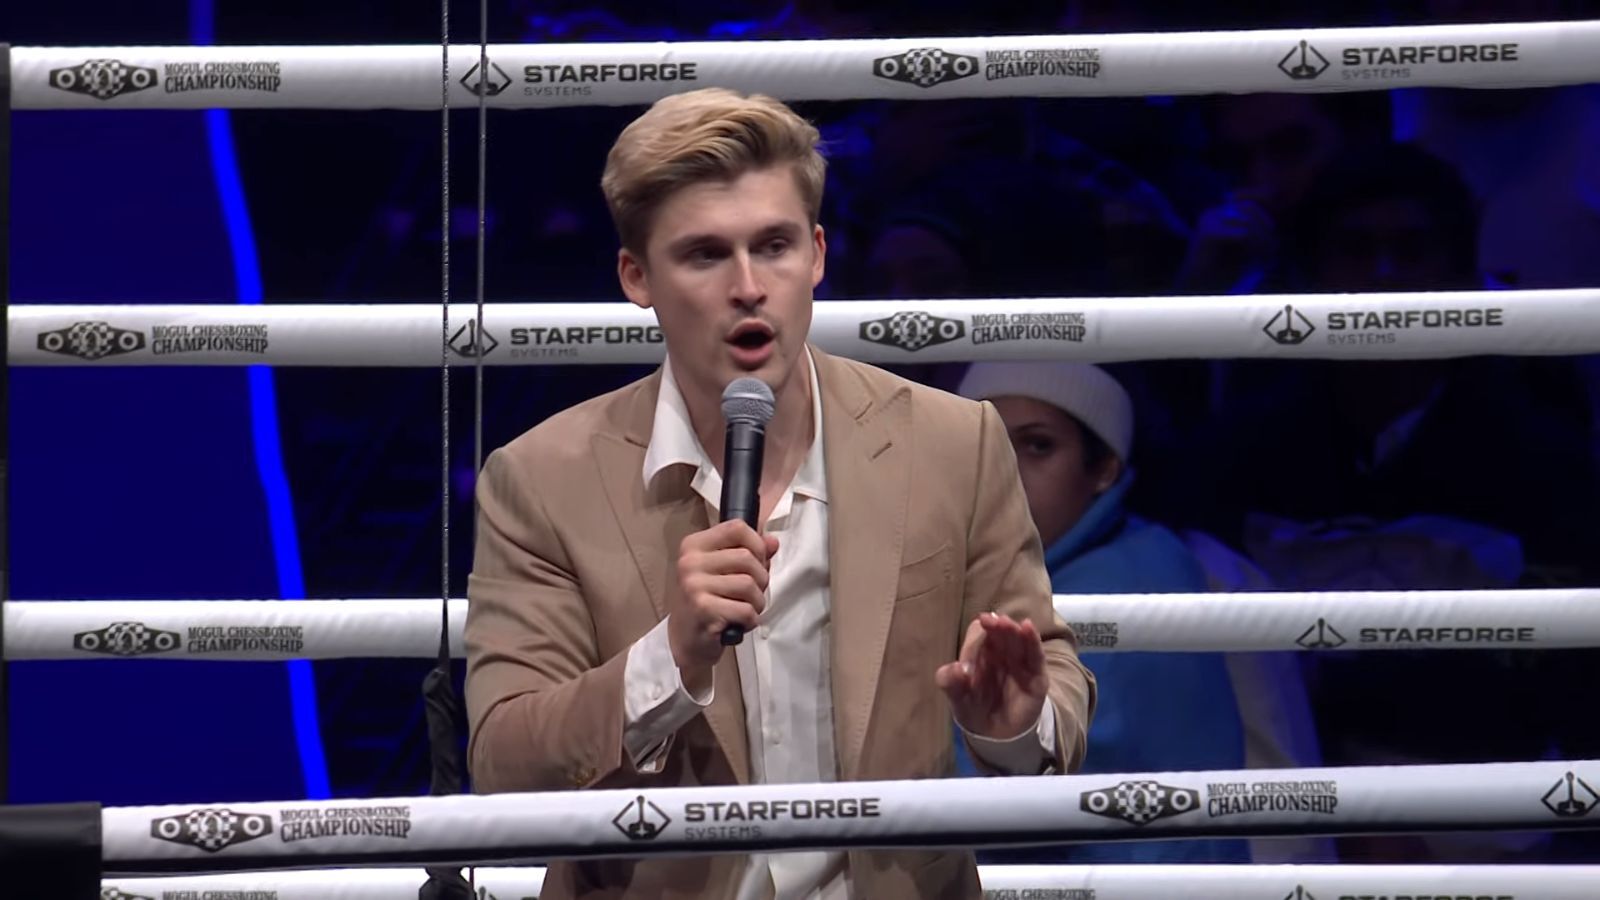 🎉Congratulations!🎉 Well Deserved! 🏆 Award for Best Streamer Event - ♟️  Chess-Boxing!🥊 : r/LudwigAhgren